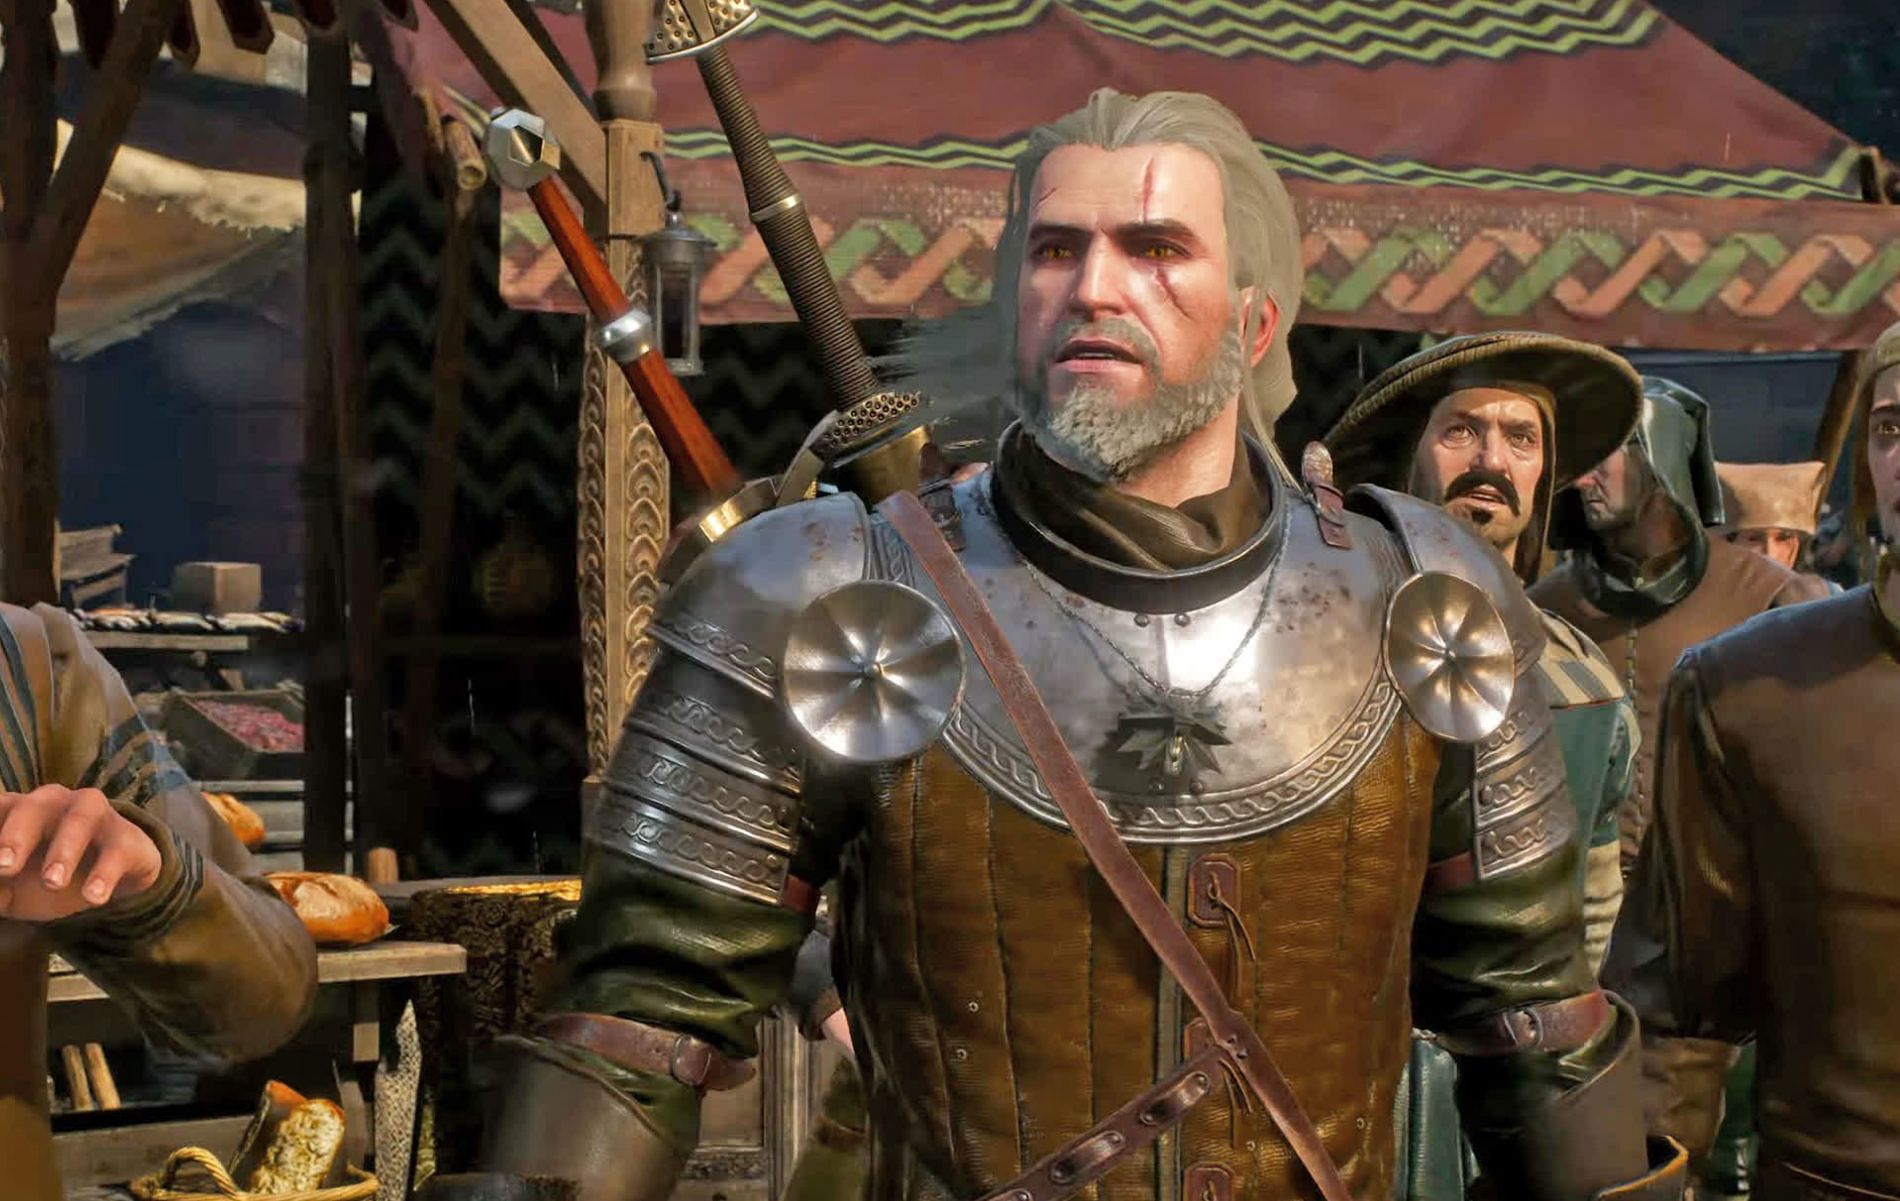 Fans remake The Witcher's prologue in The Witcher 3's engine